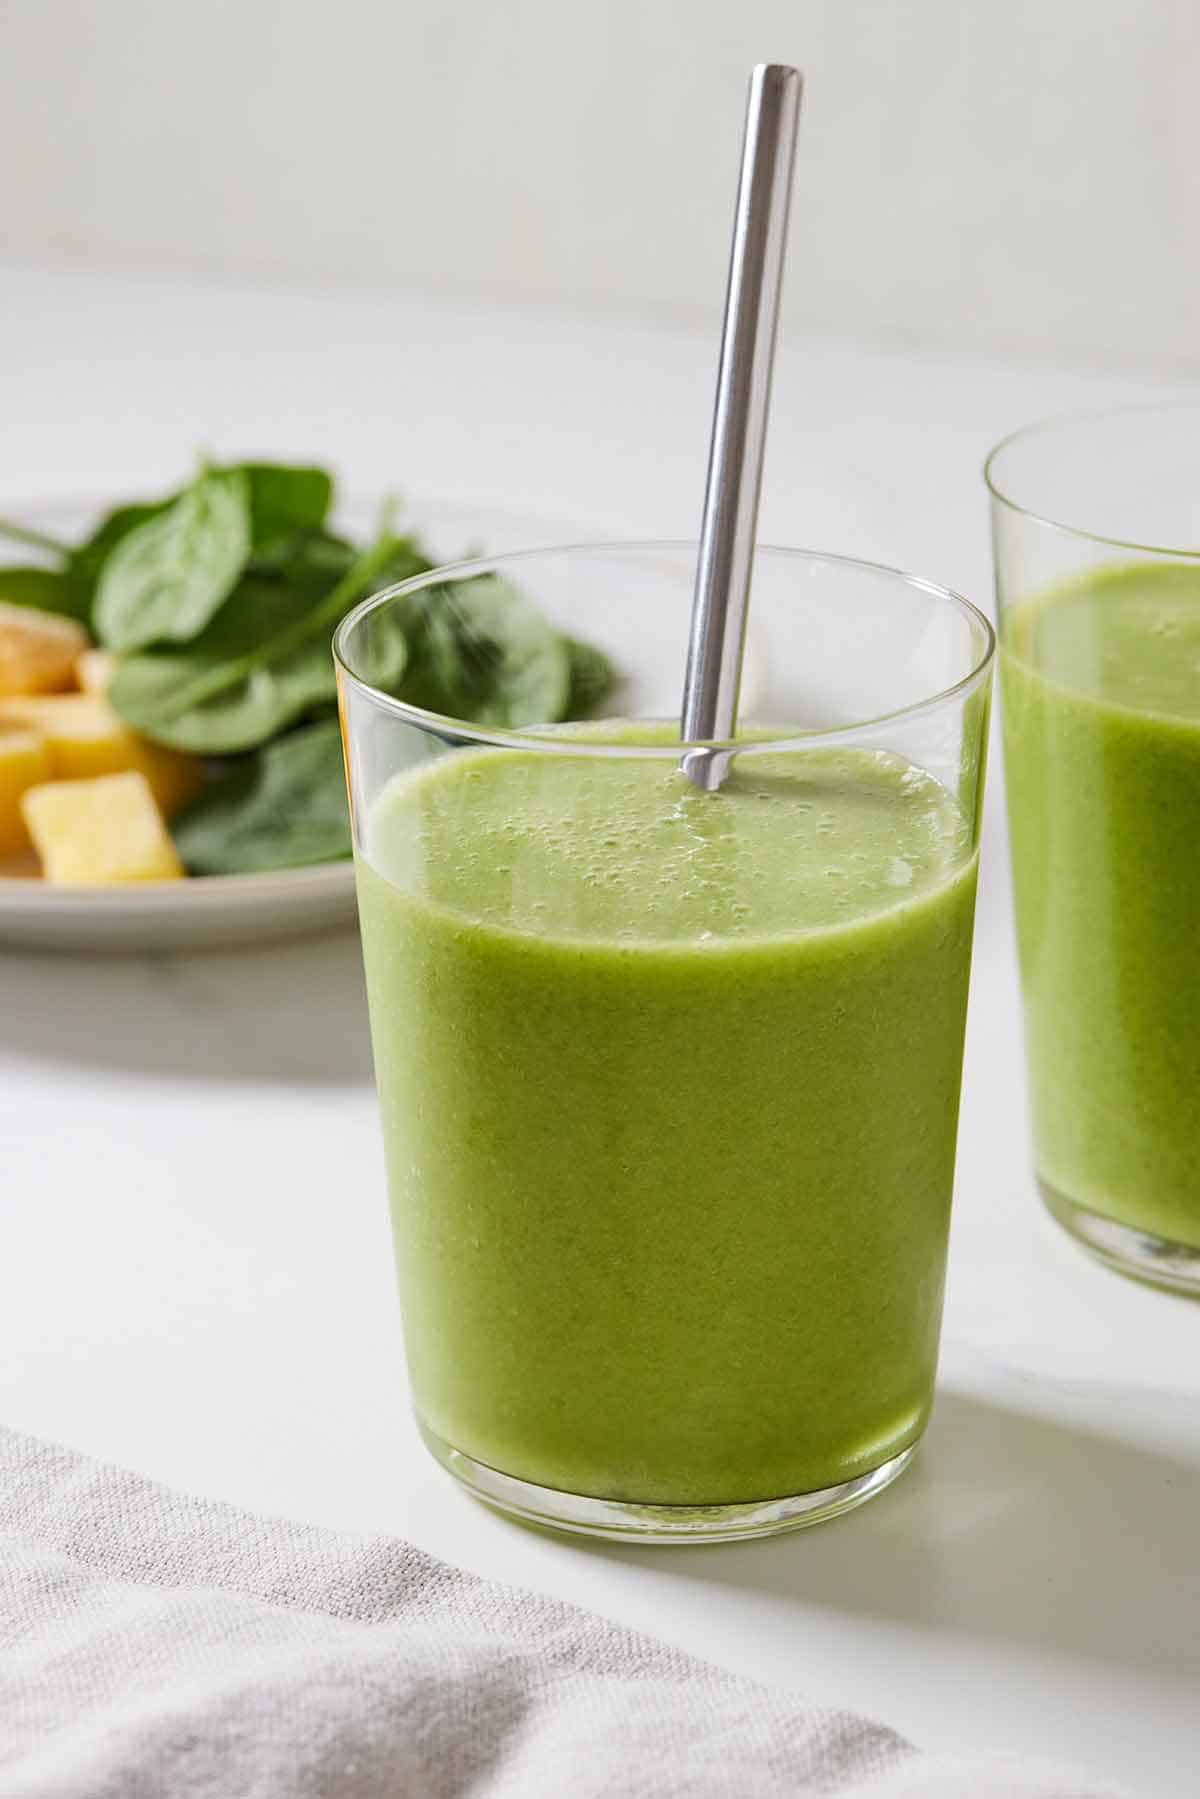 A glass of green smoothie with a metal straw.